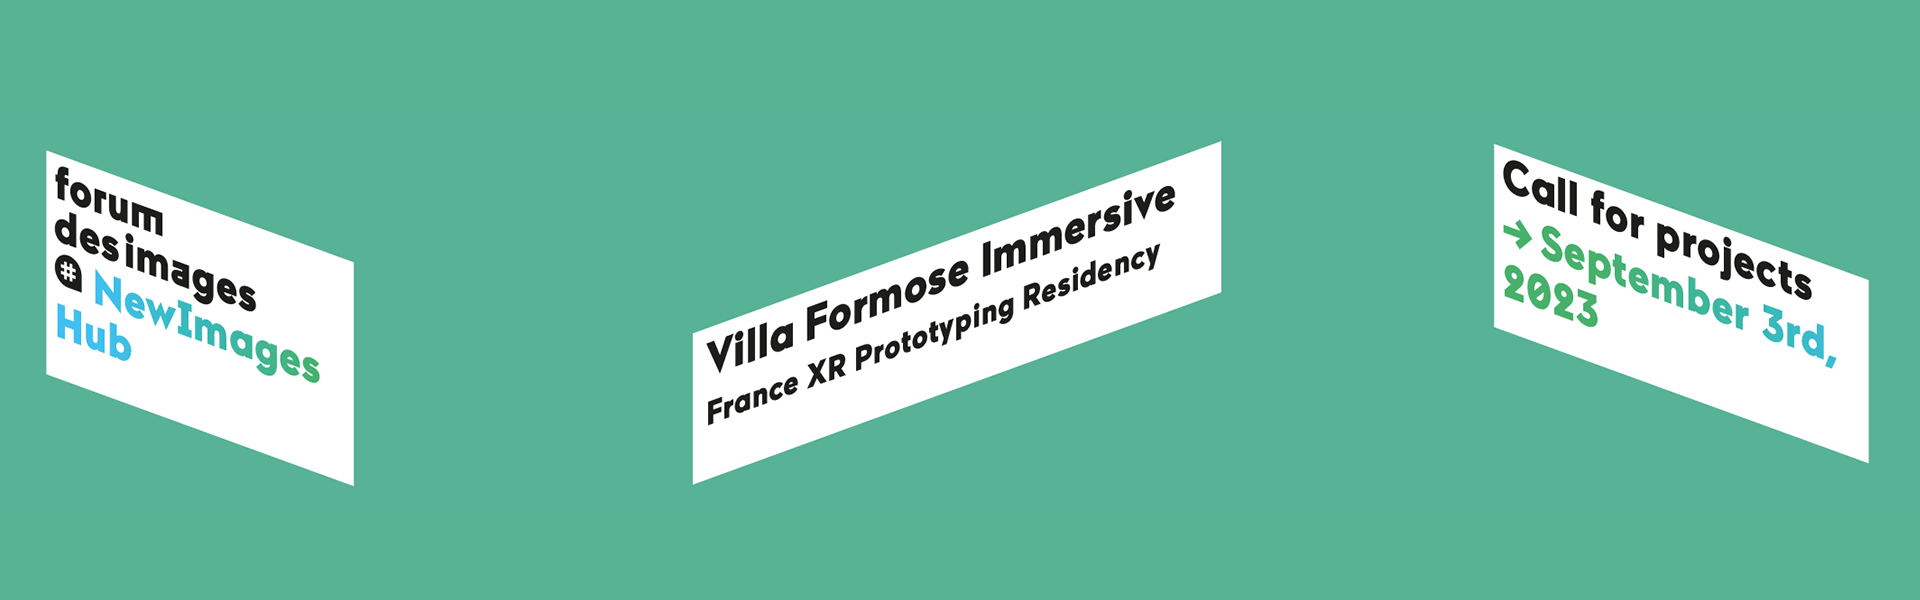 Villa Formose Immersive - France XR Prototyping Residency - call for applications until Sept. 3rd